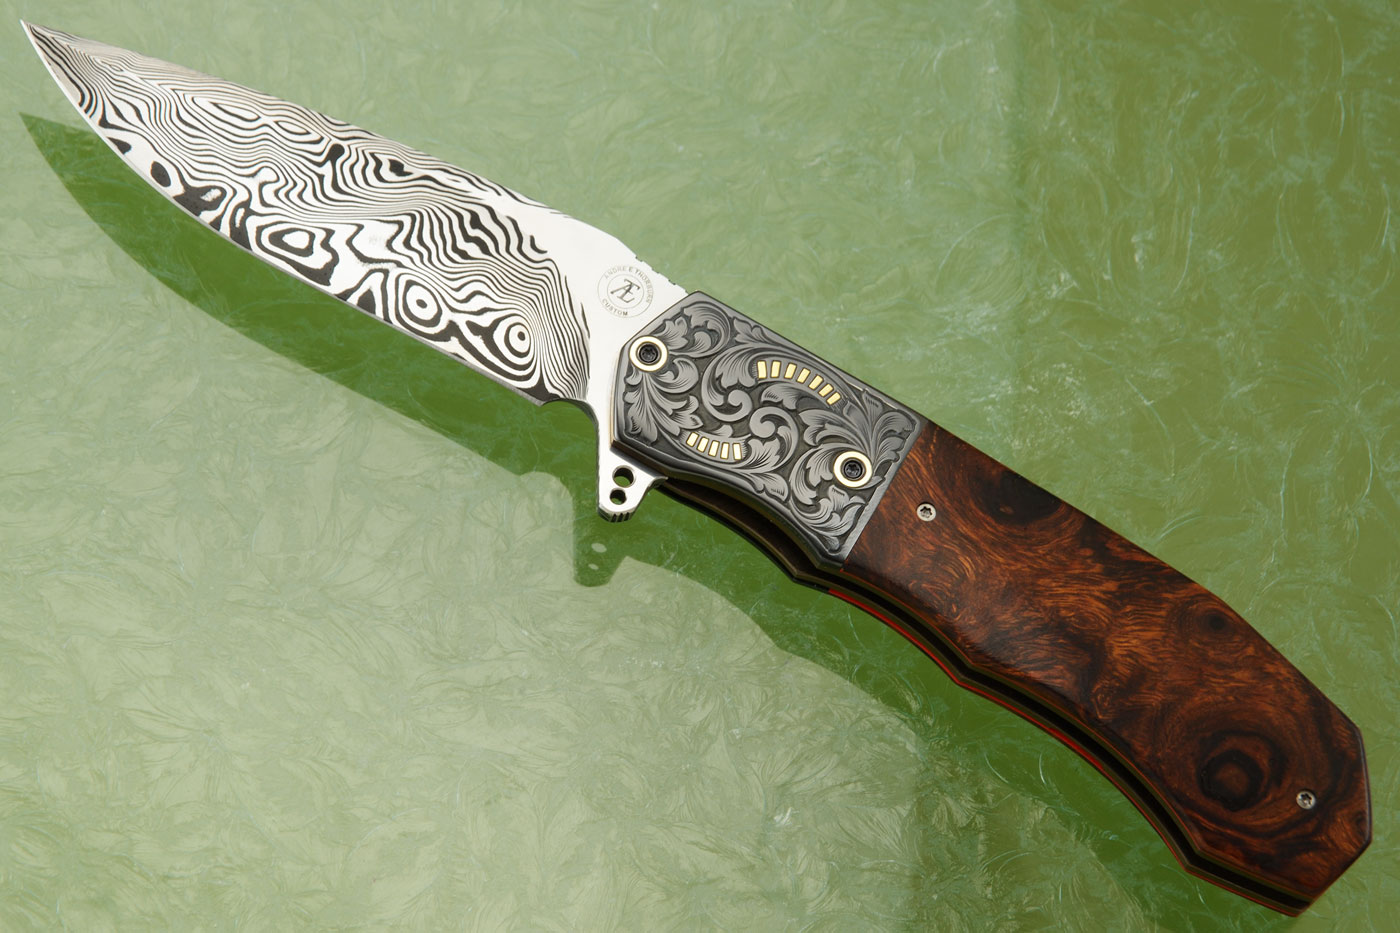 L44 Compact Flipper with Ironwood, Damascus, and Engraved Zirconium with Gold Inlays (Ceramic IKBS)